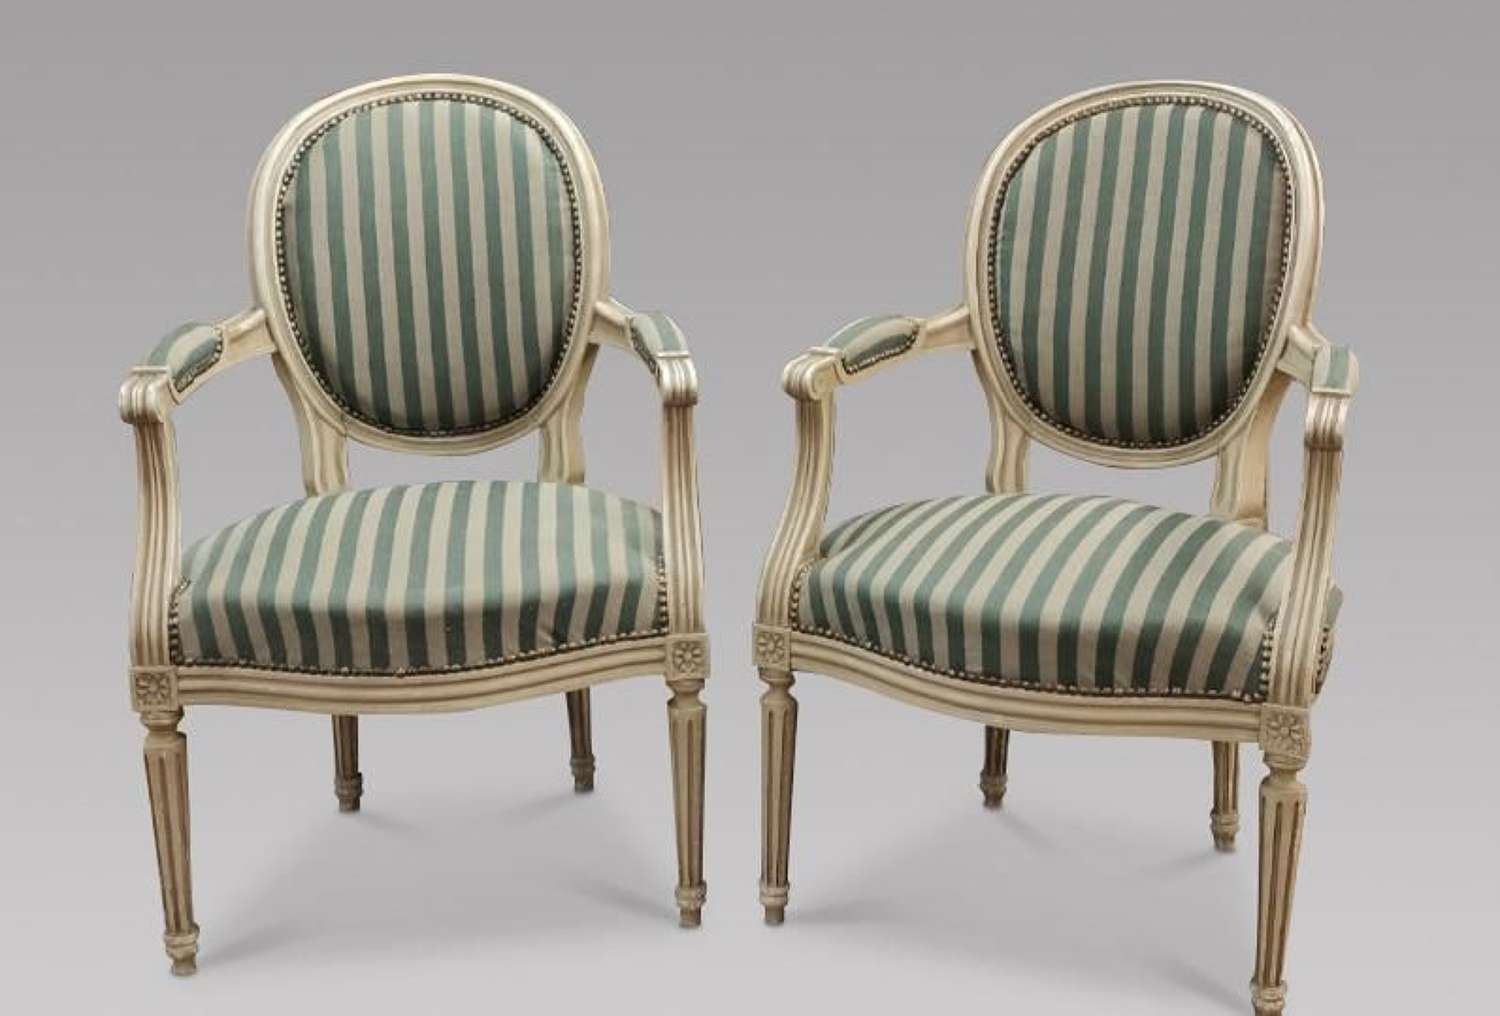 Pair of Painted Fauteuils re-upholstered